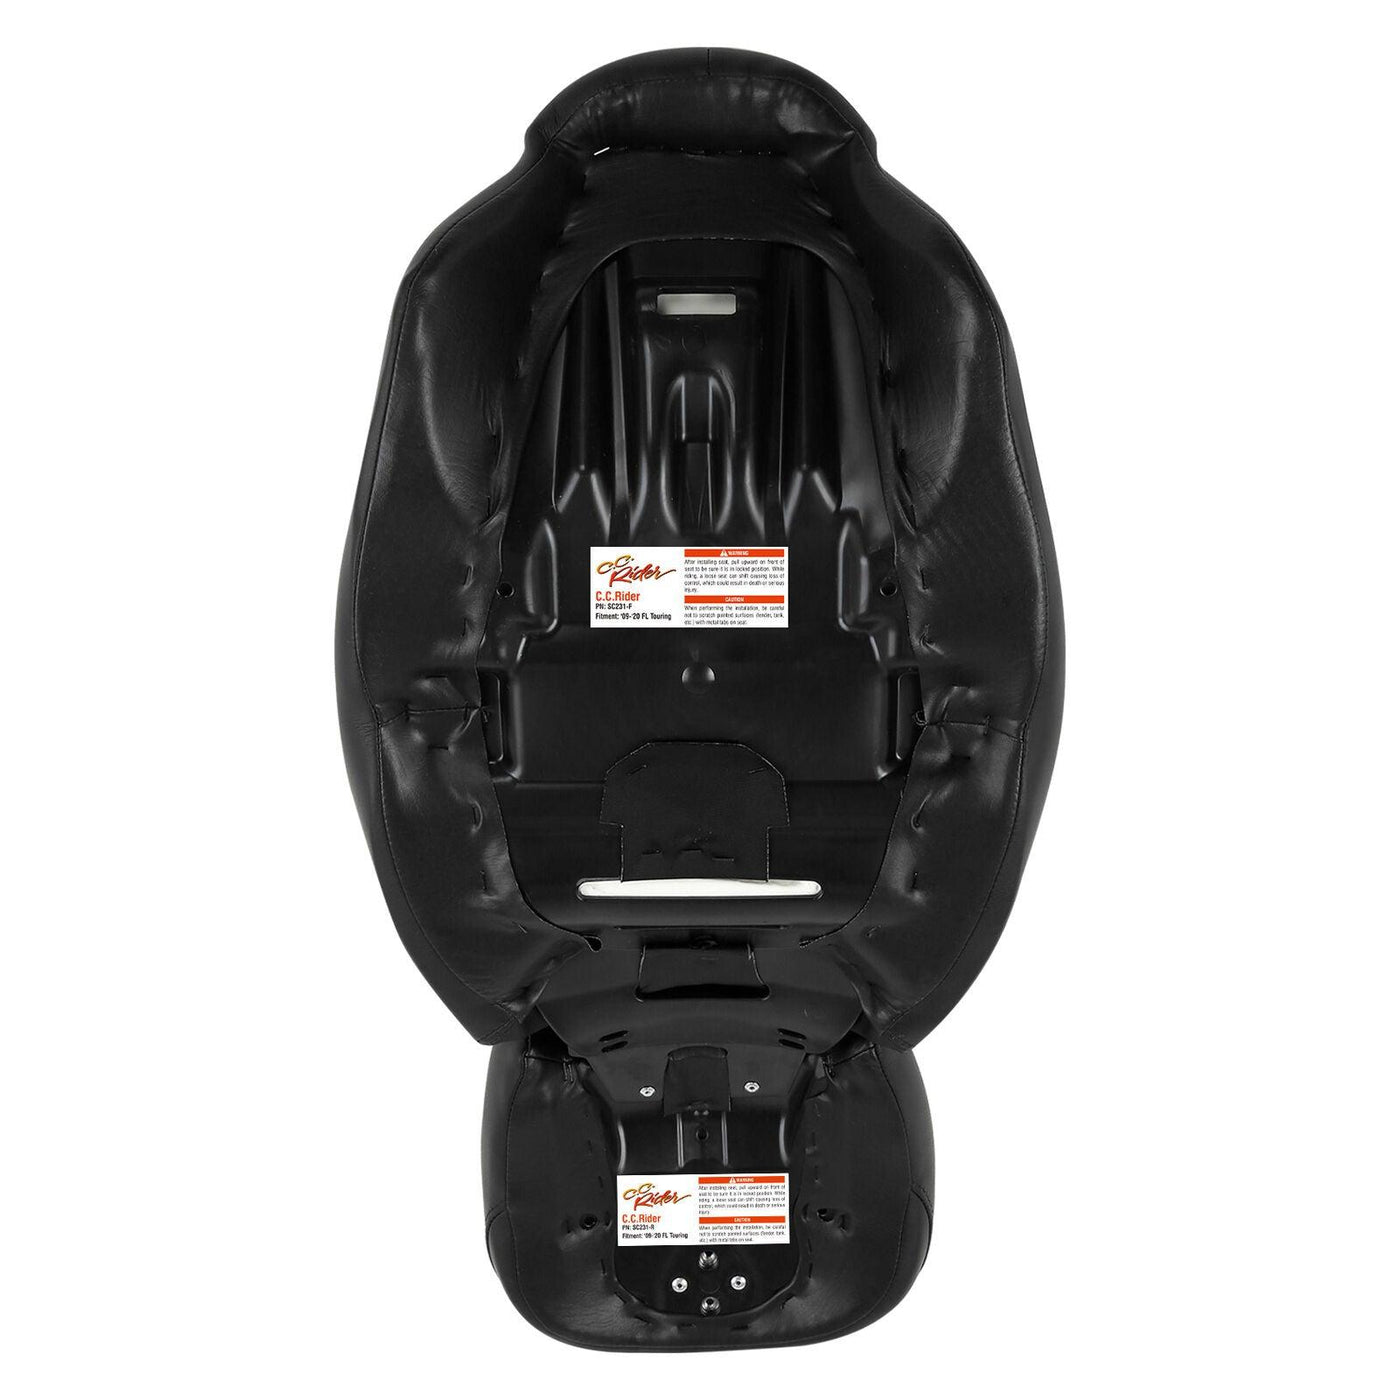 Gel Driver &Passenger Seat Fit For Harley Touring CVO Limited FLHTKSE 09-22 - Moto Life Products